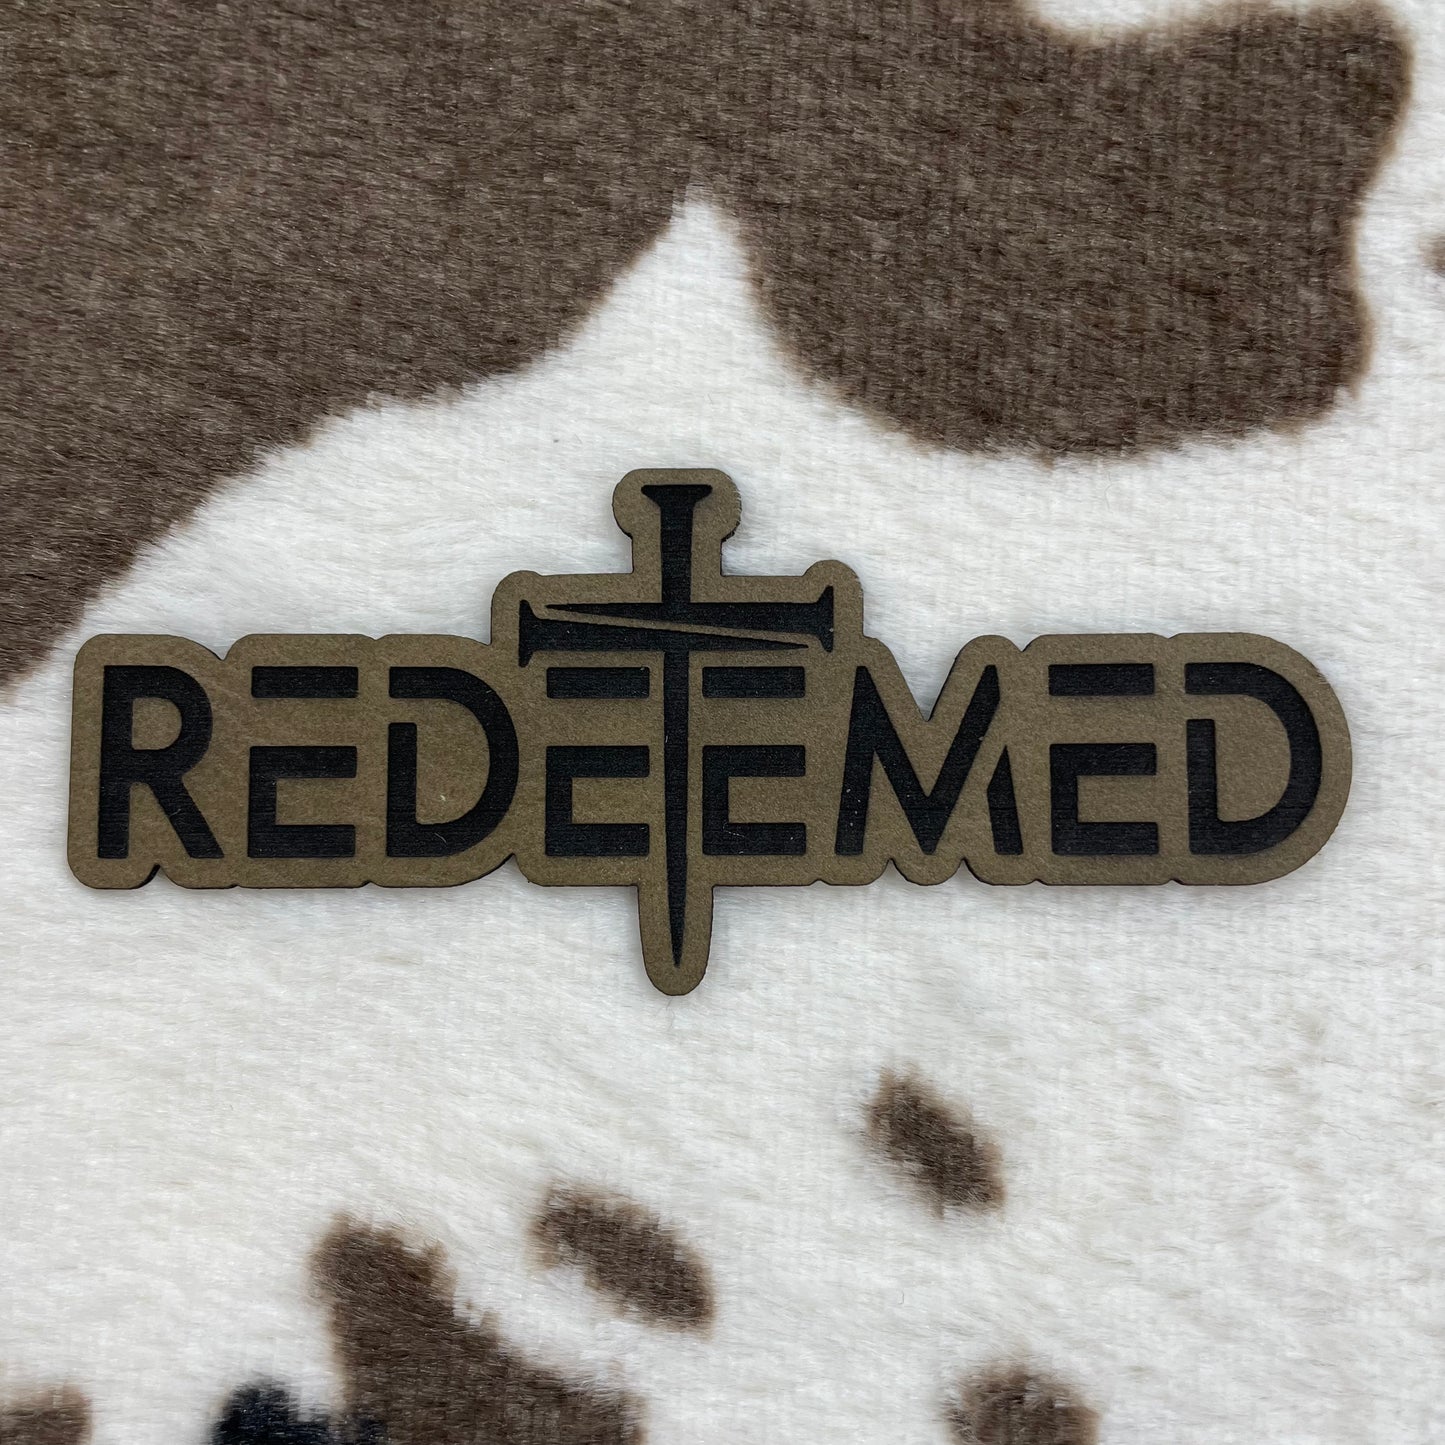 Redeemed- 3.7" wide x 1.5" tall Leatherette Patch